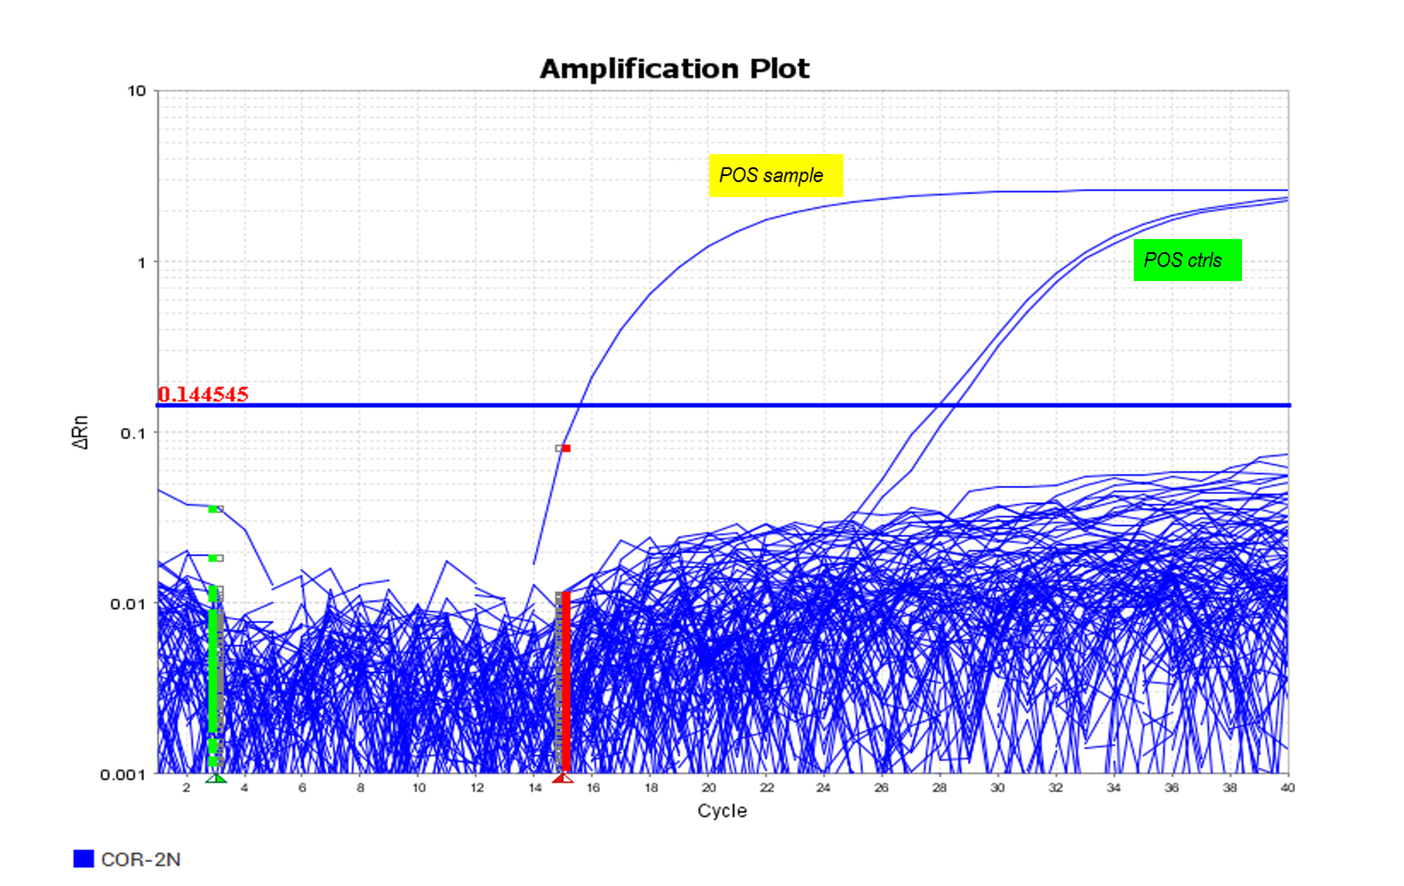 Figure 2- Amplification curves for samples from a 384-well plate